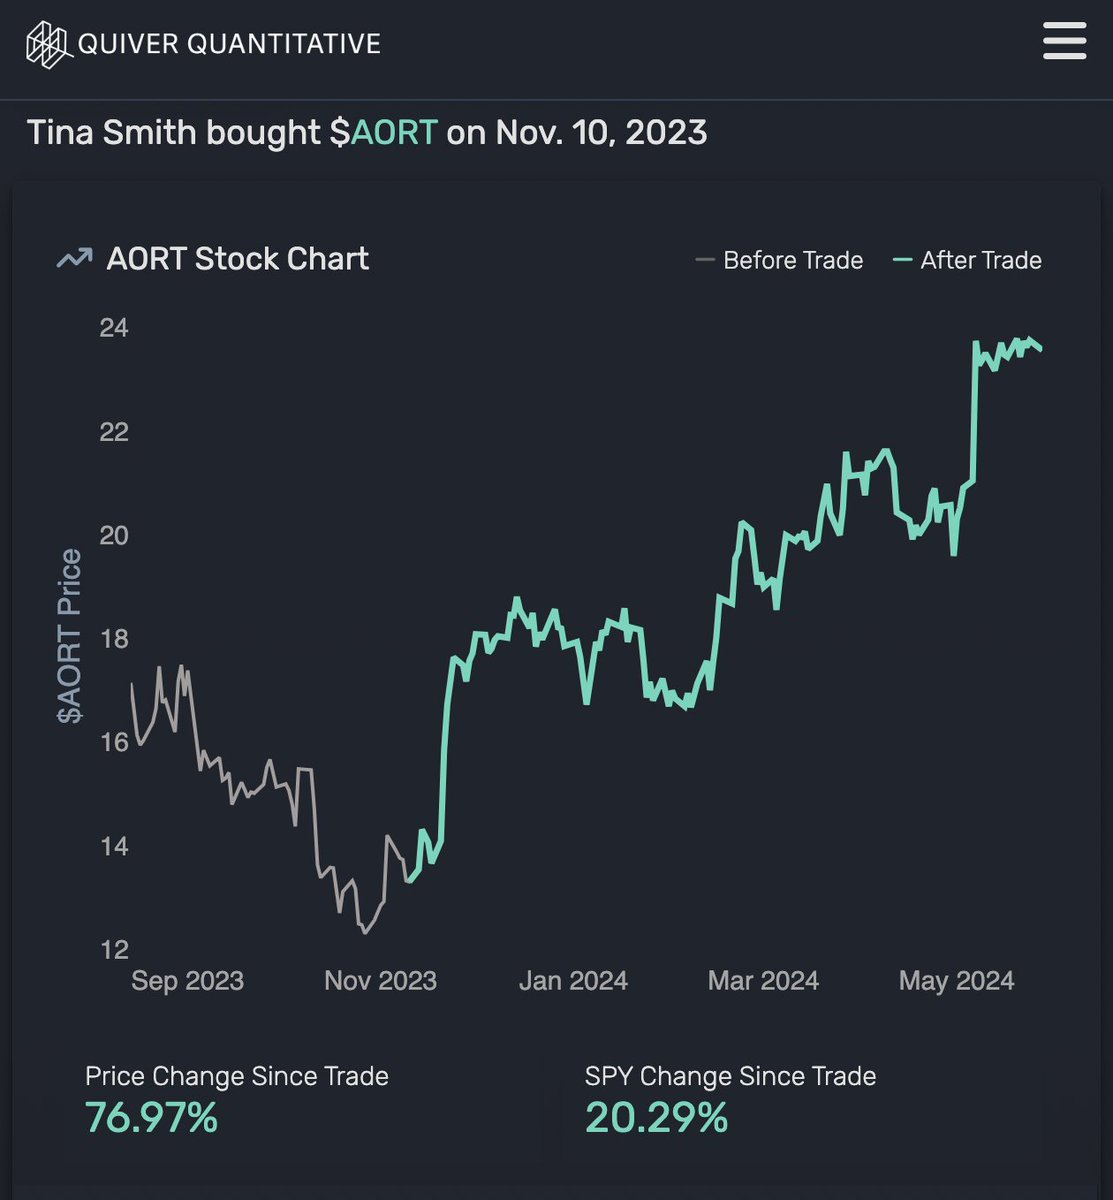 🚨 UPDATE

In November, we posted a report on a suspicious purchase of Artivion stock by Senator Tina Smith.

The stock has now risen 76% since then.